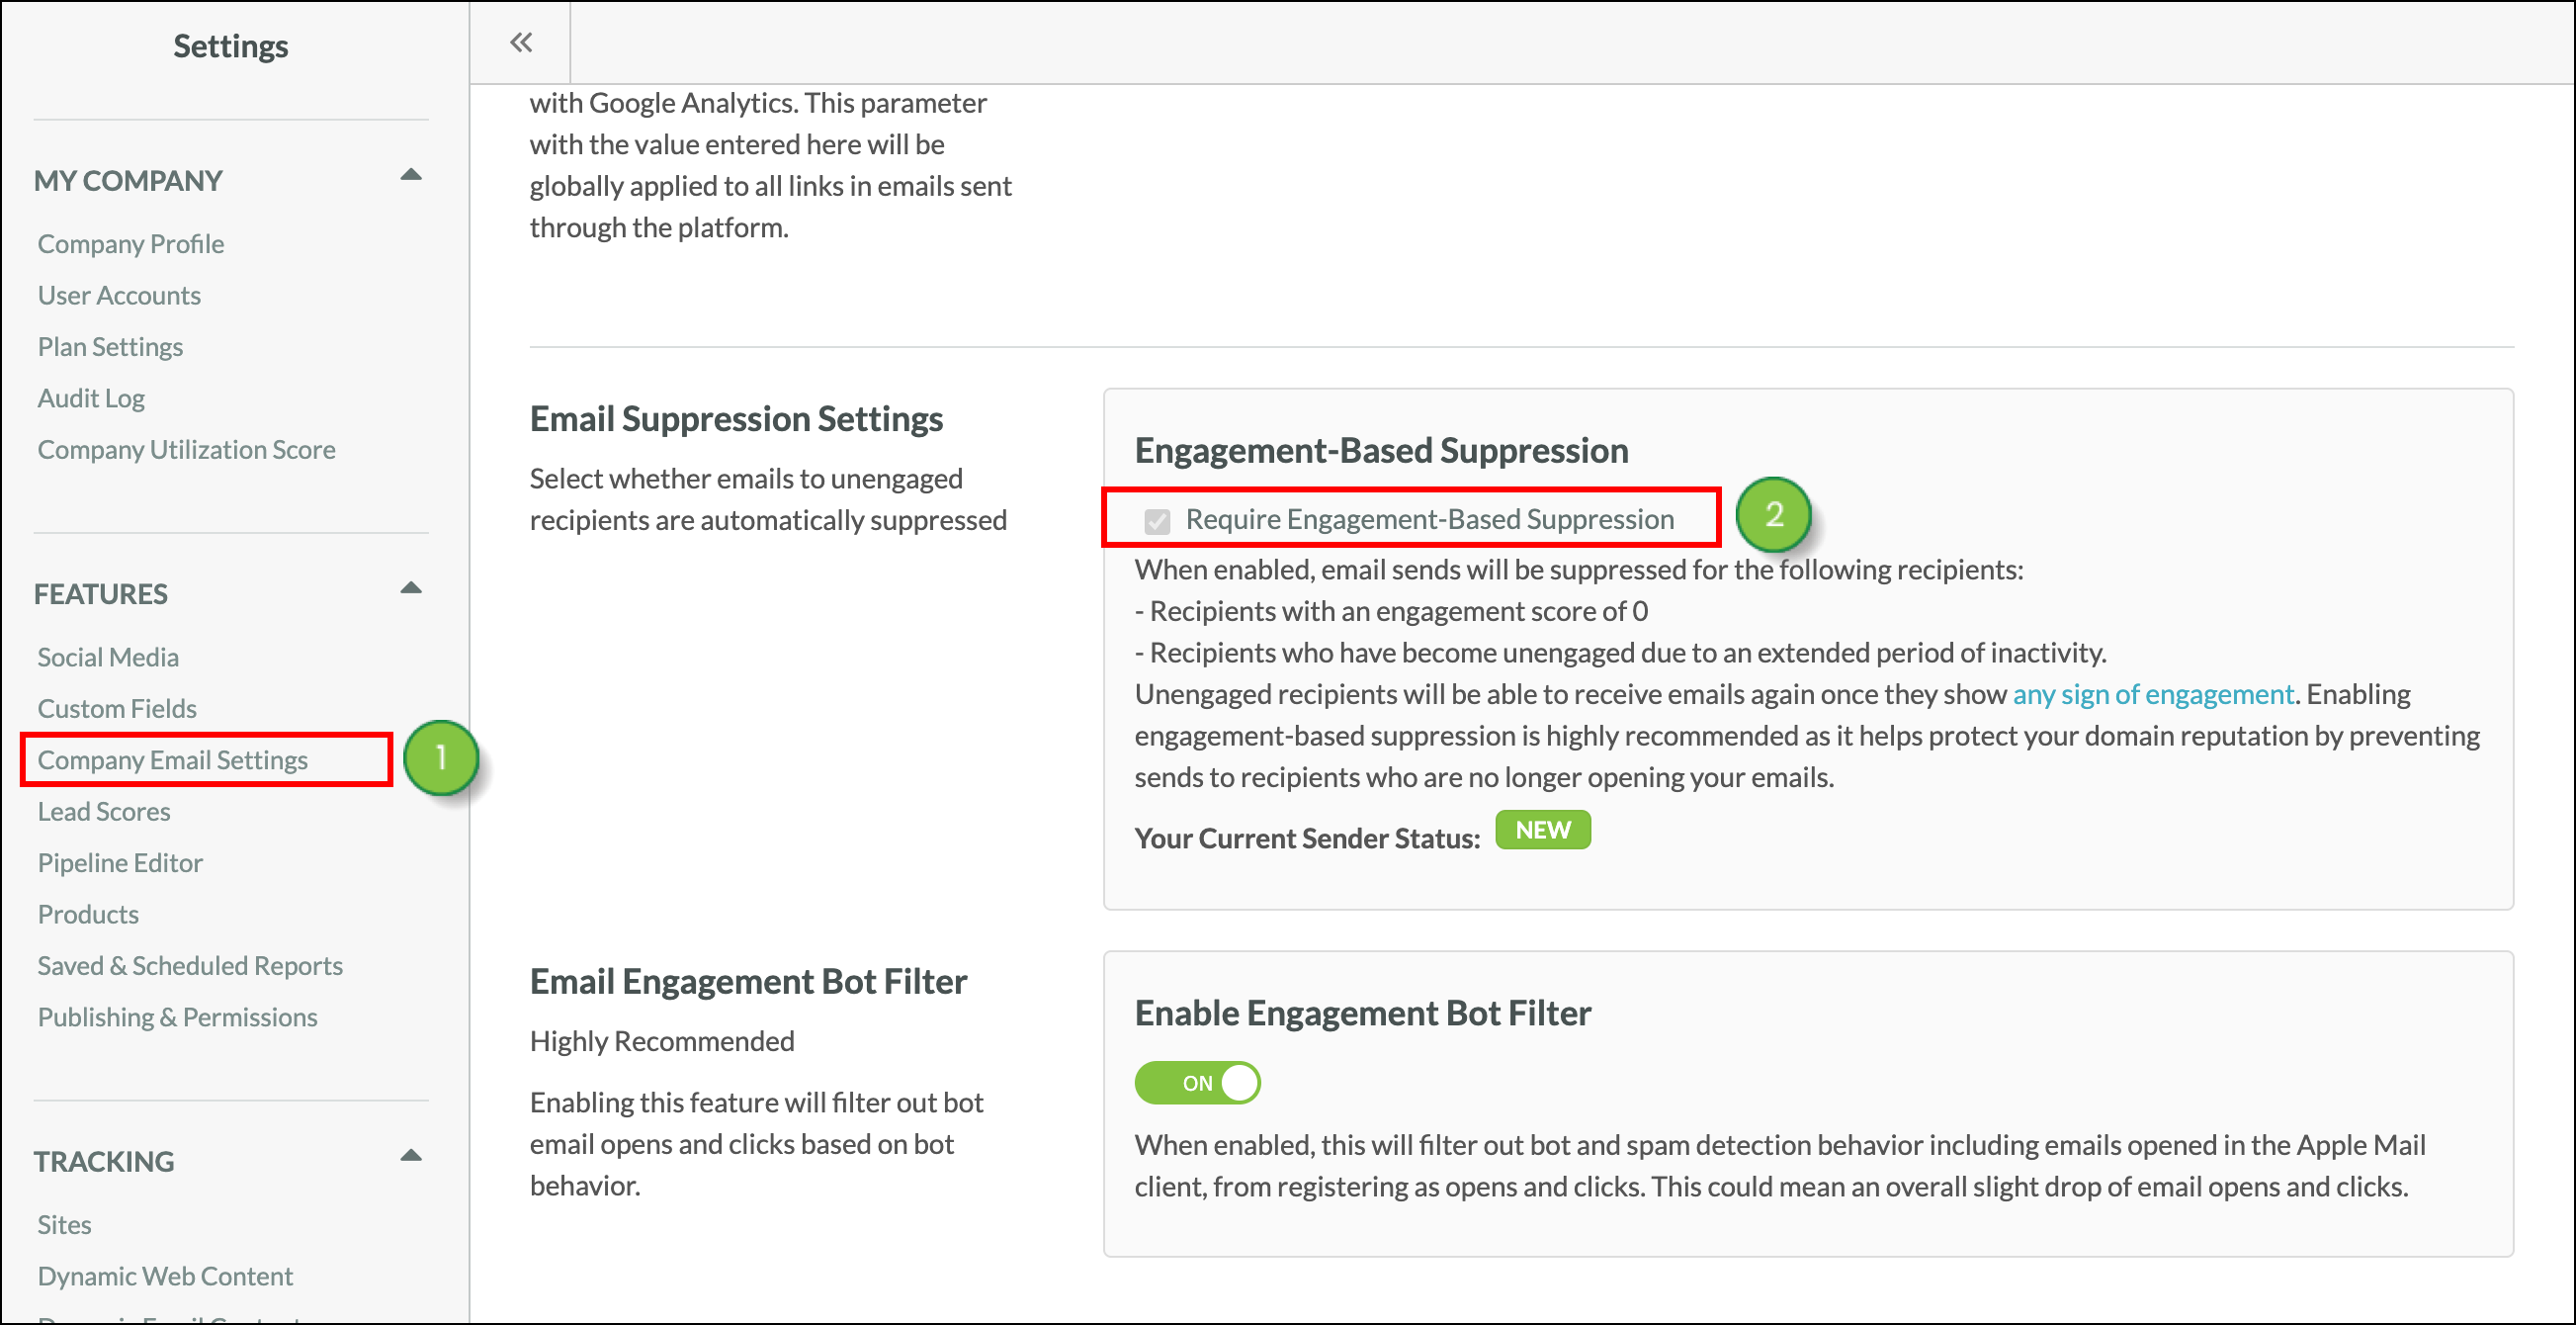 Email Suppression Settings Require Engagement